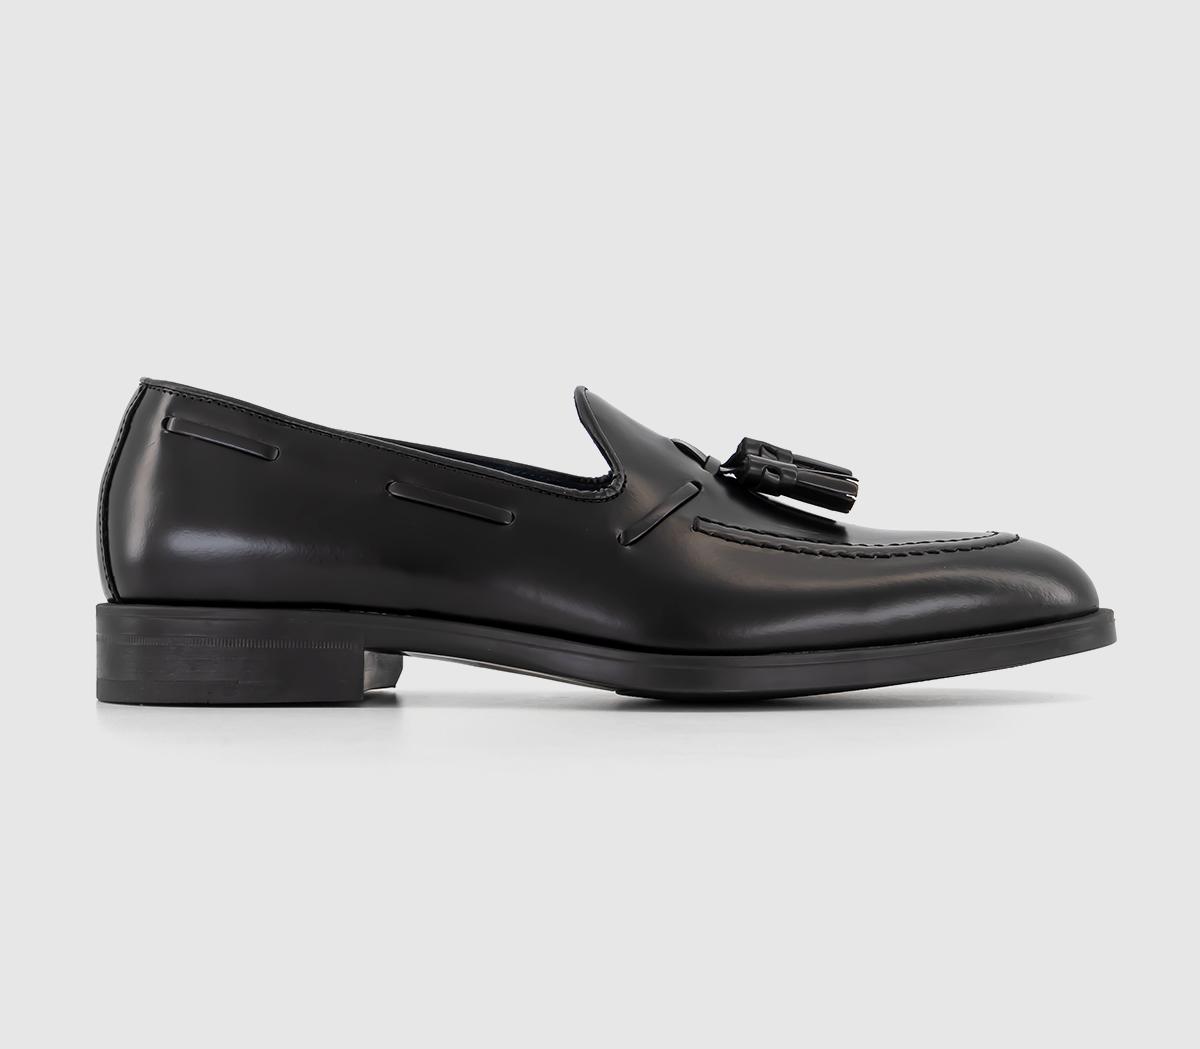 Poste Painswick Tassel Loafers Black Leather - Men’s Loafers